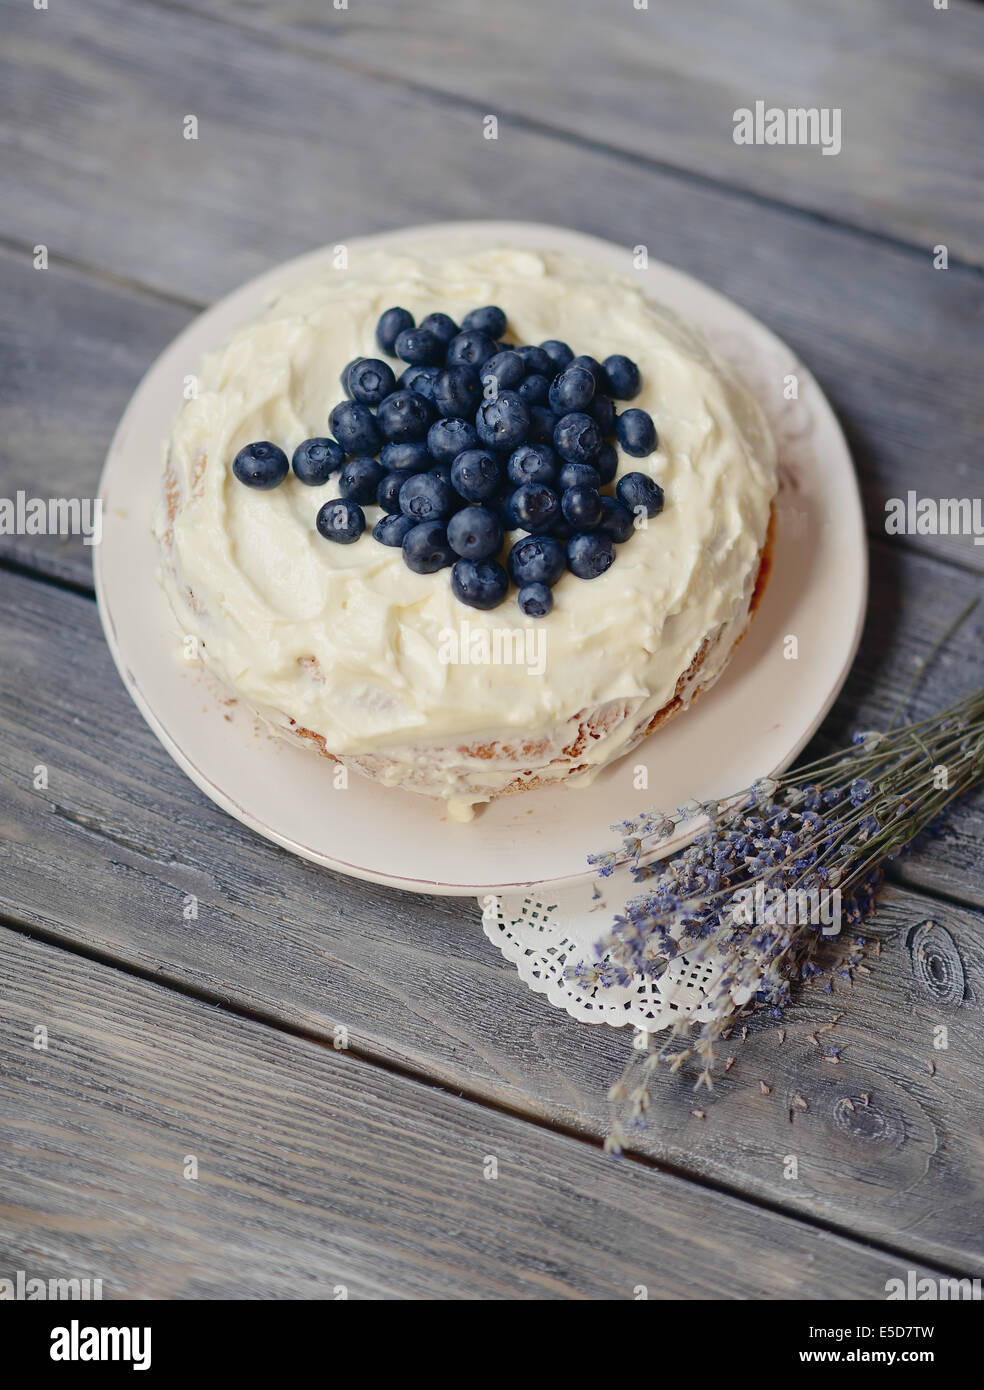 pie on a wooden table decorated with berries and lavender bouquet Stock Photo